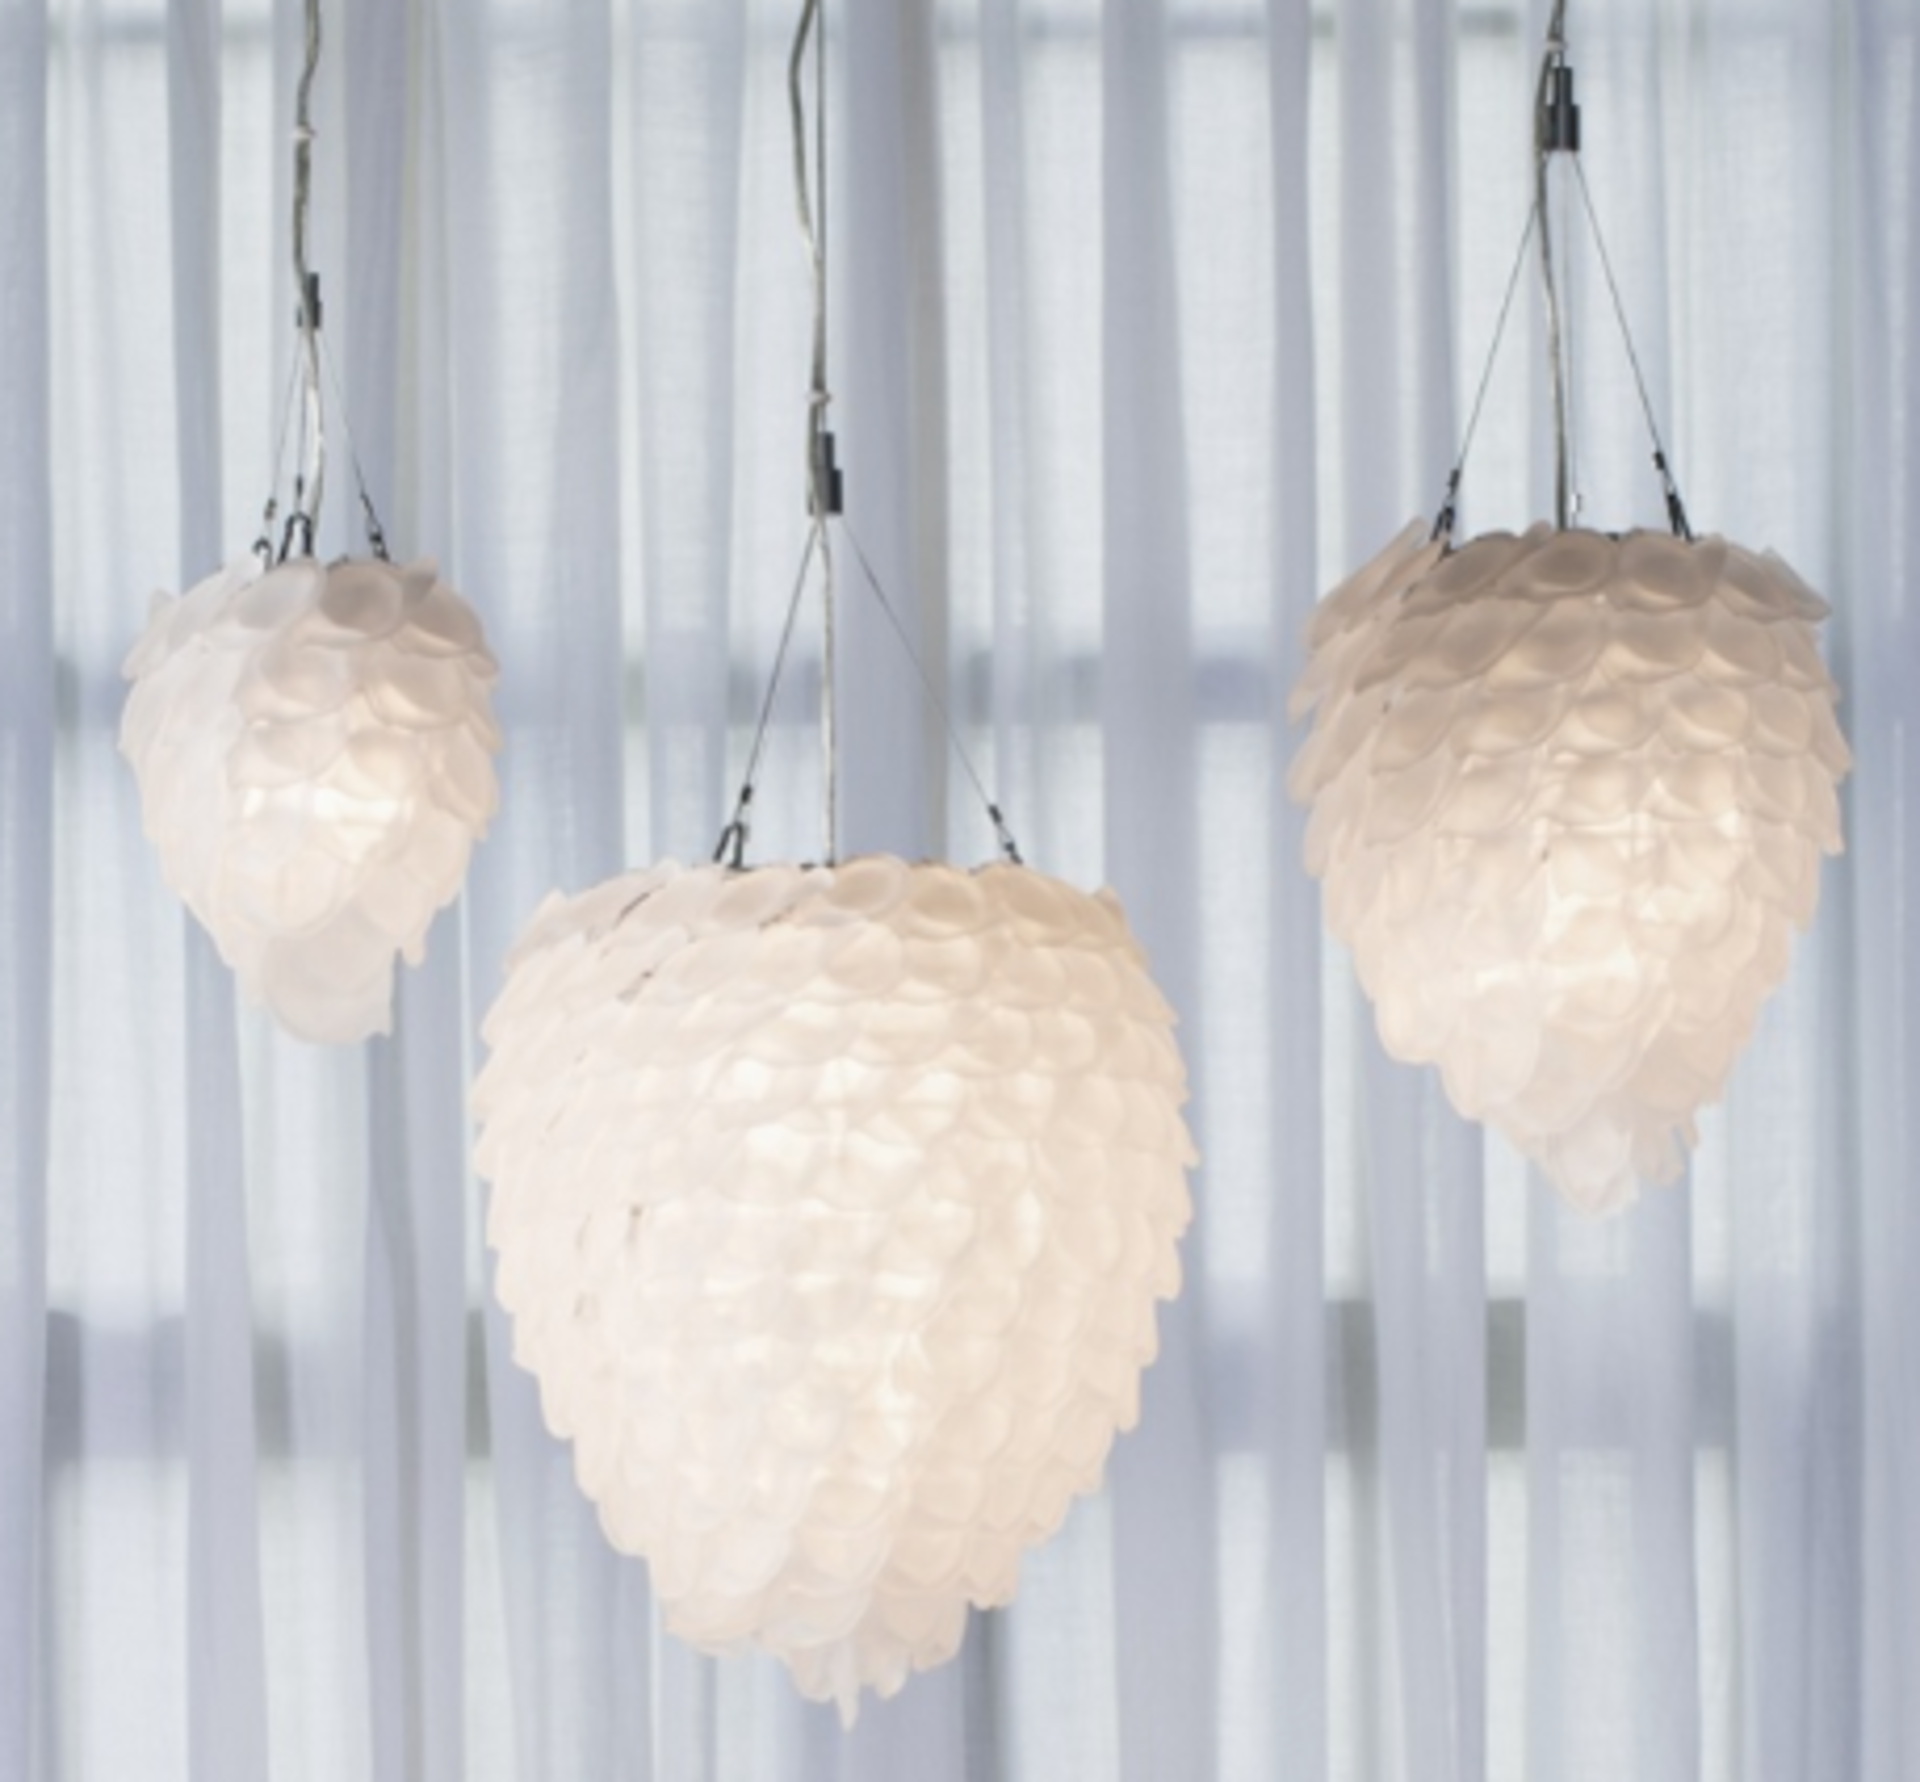 Pharohs Petal Pendant Frosted Medium Our Pharaoh pendant lamp is made from hand cut frosted glass